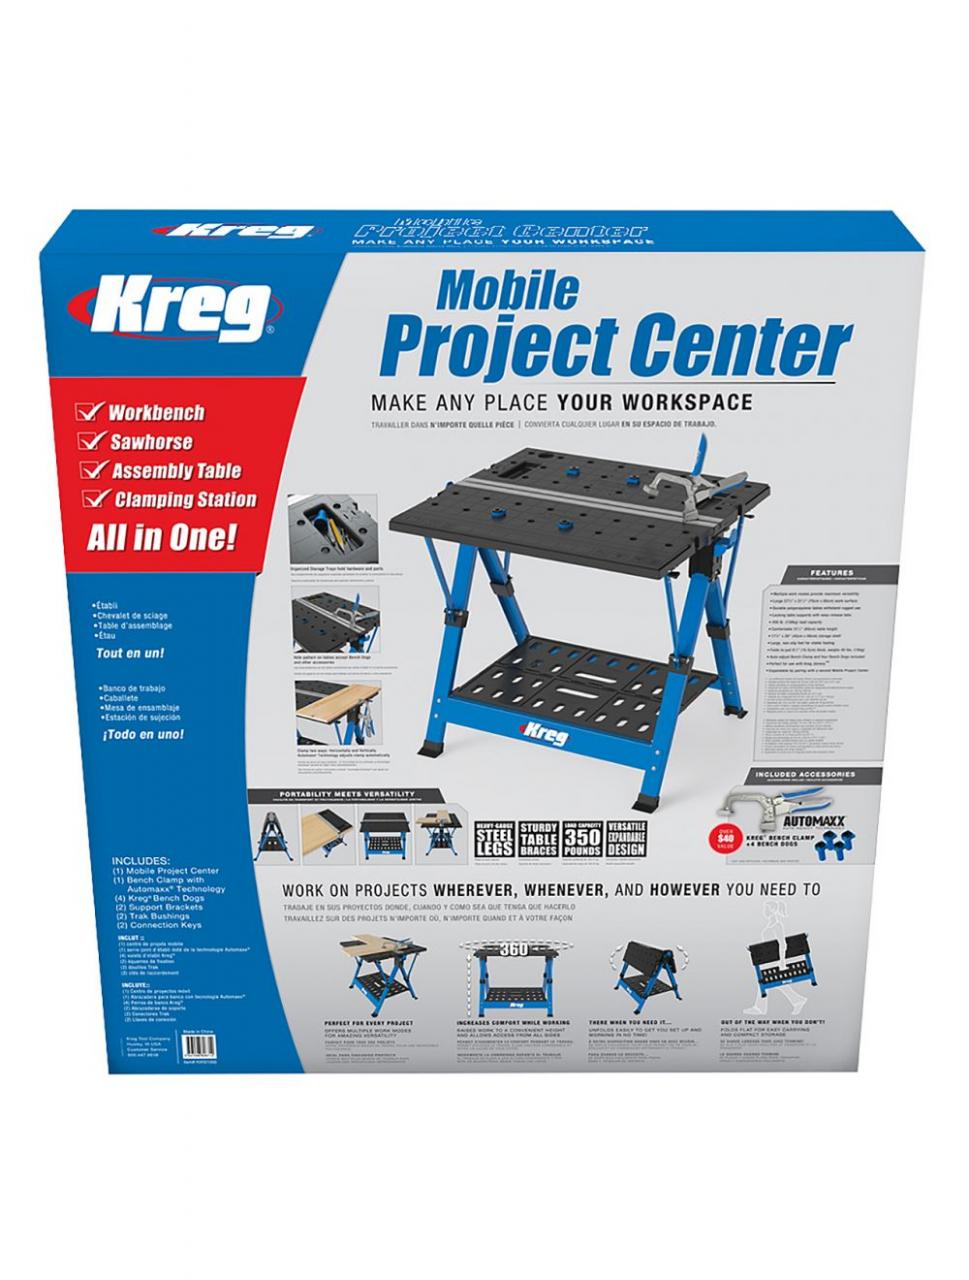 Kreg Mobile Project Center Review: Is It Worth for Your Workshop?